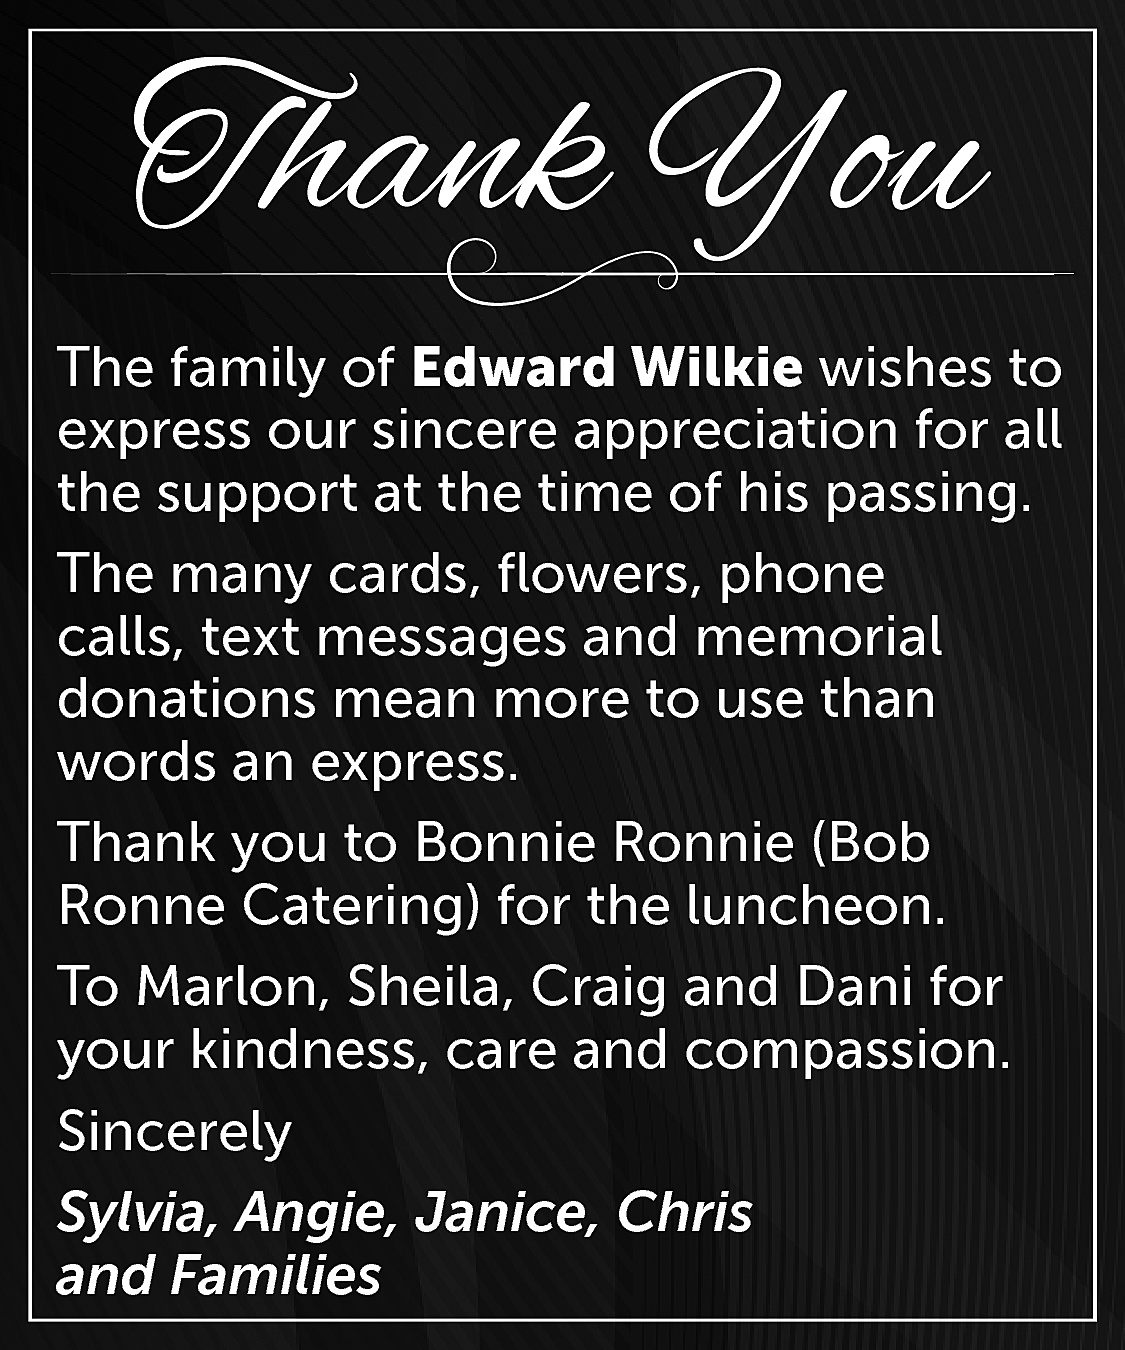 The family of Edward Wilkie  The family of Edward Wilkie wishes to  express our sincere appreciation for all  the support at the time of his passing.  The many cards, flowers, phone  calls, text messages and memorial  donations mean more to use than  words an express.  Thank you to Bonnie Ronnie (Bob  Ronne Catering) for the luncheon.  To Marlon, Sheila, Craig and Dani for  your kindness, care and compassion.  Sincerely  Sylvia, Angie, Janice, Chris  and Families    